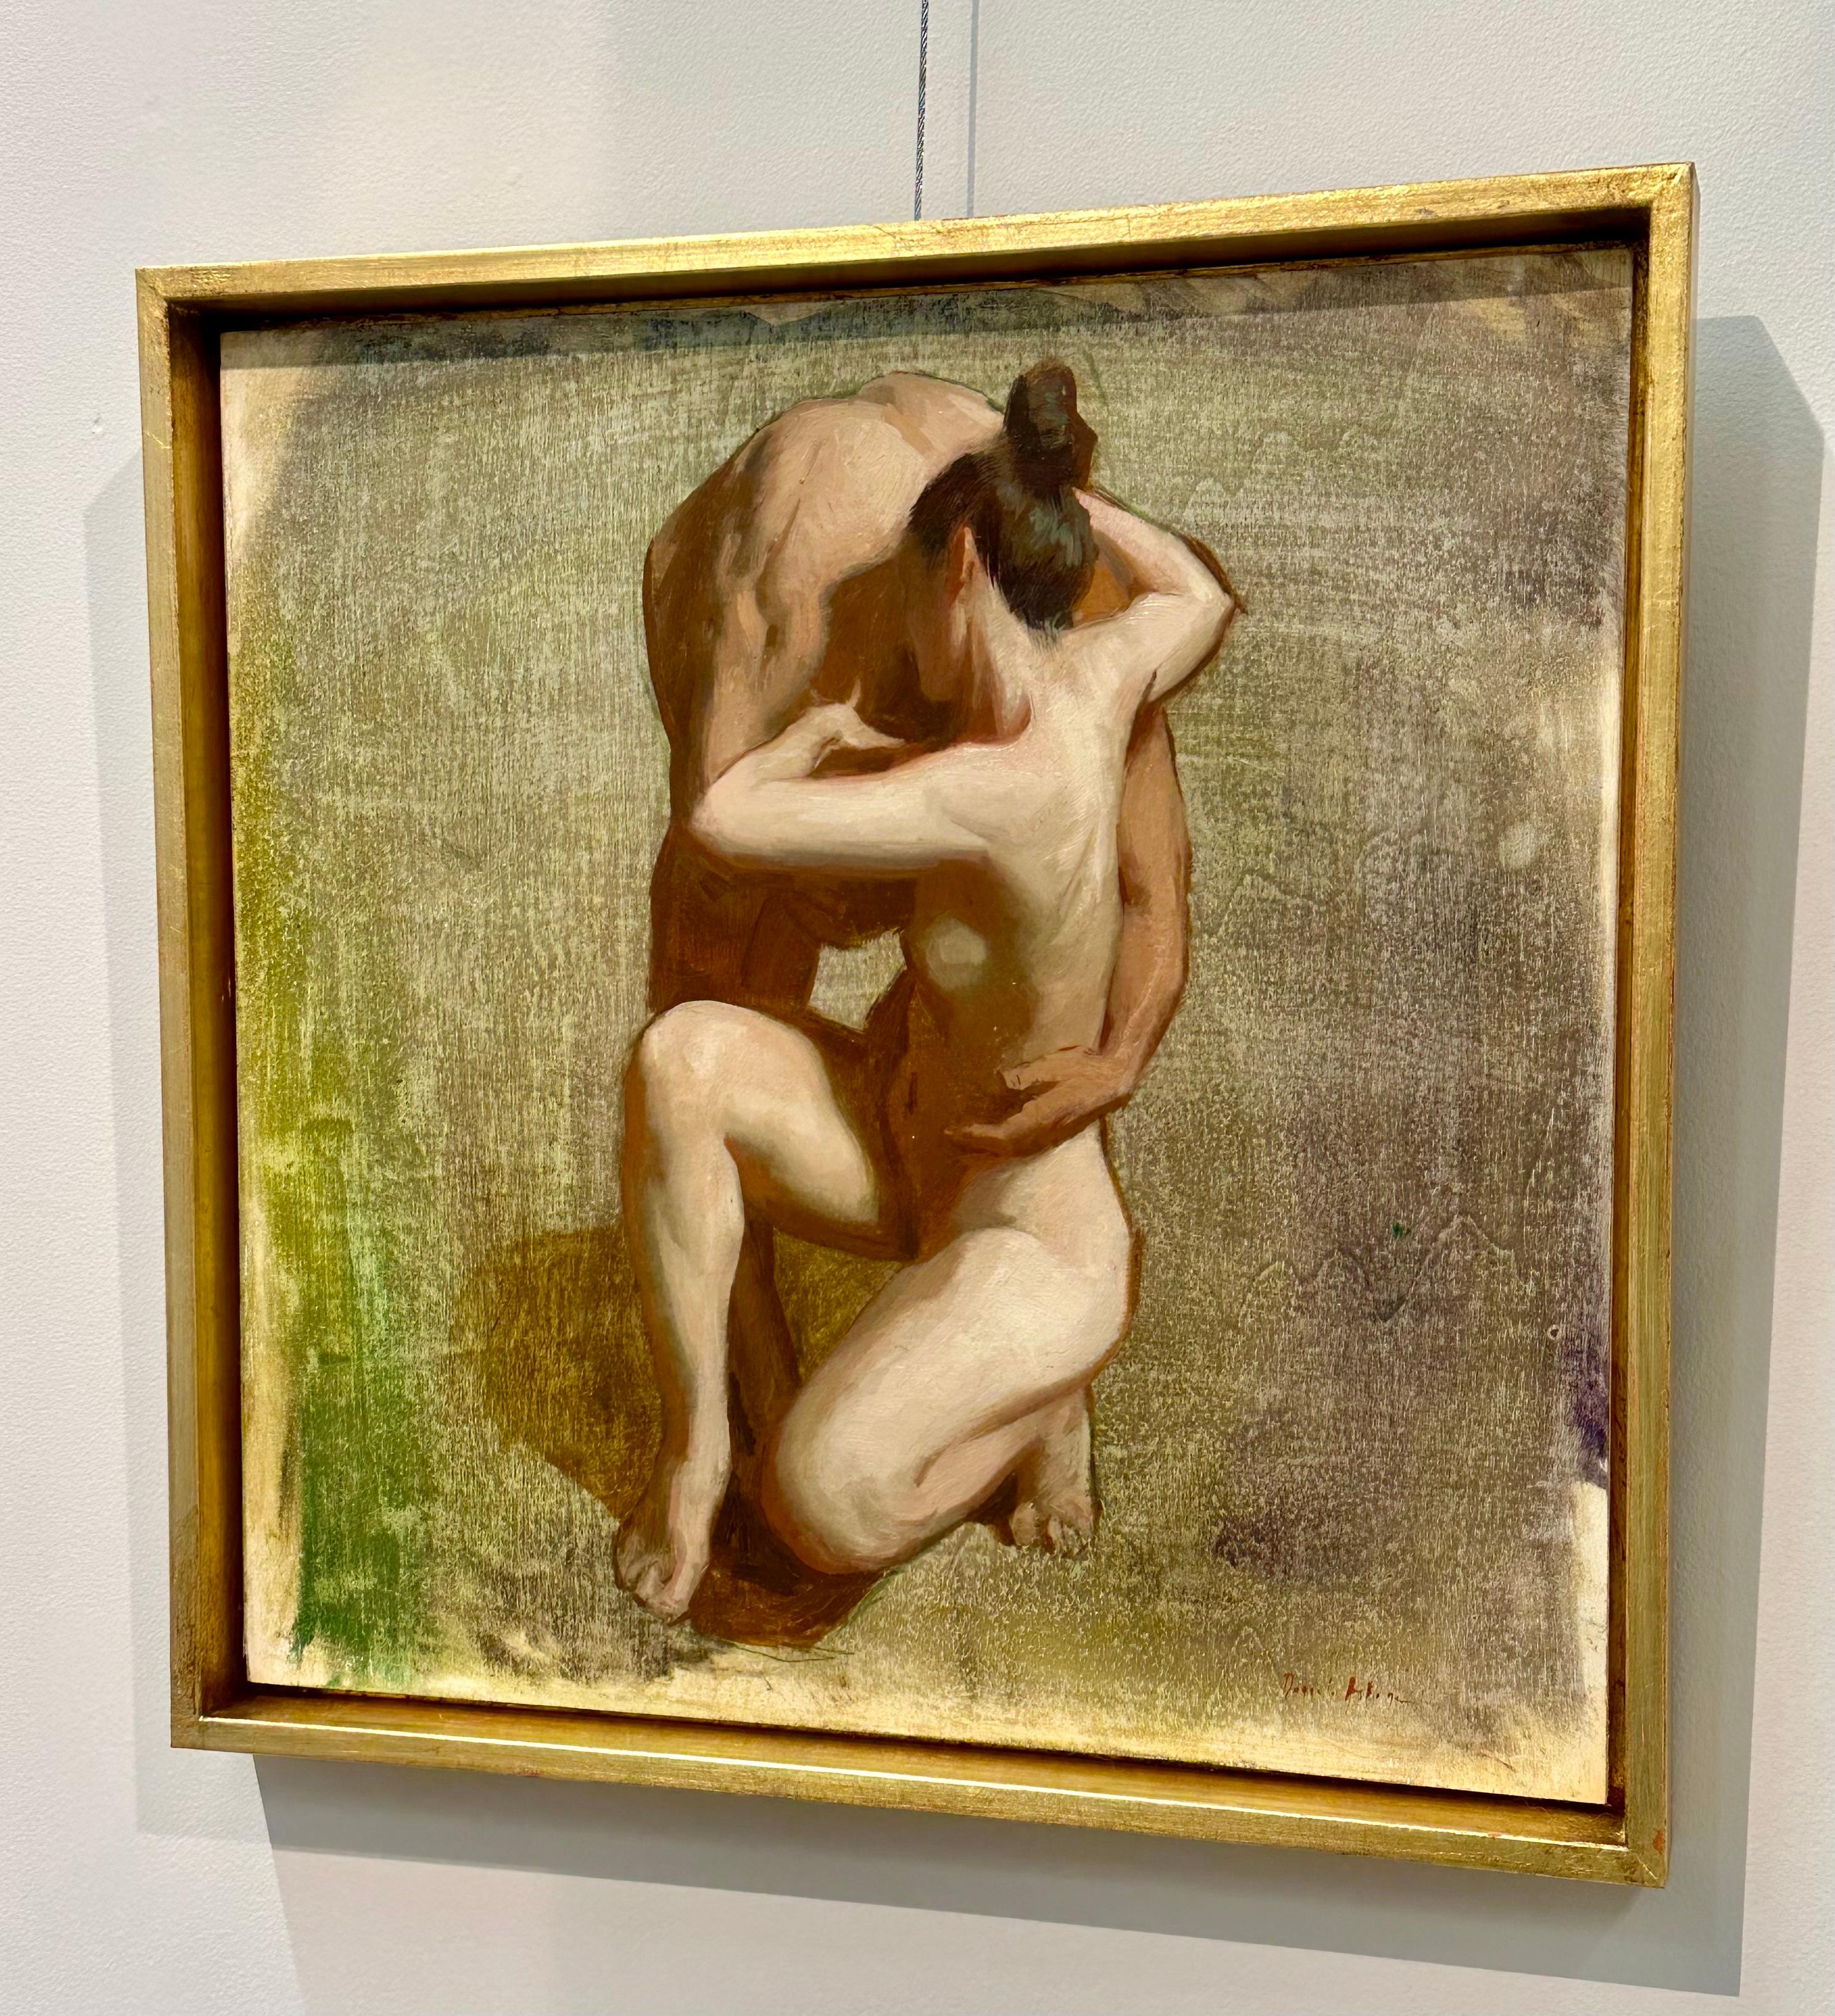 Daniela Astone
Couple
40 x 40 cm
Oil on wood

Daniela Astone works and lives in Florence. 
For years she was a teacher on the famous Florence Art Academy. Since 2022 she fulltime works as a painter. Her works are all around the world in great